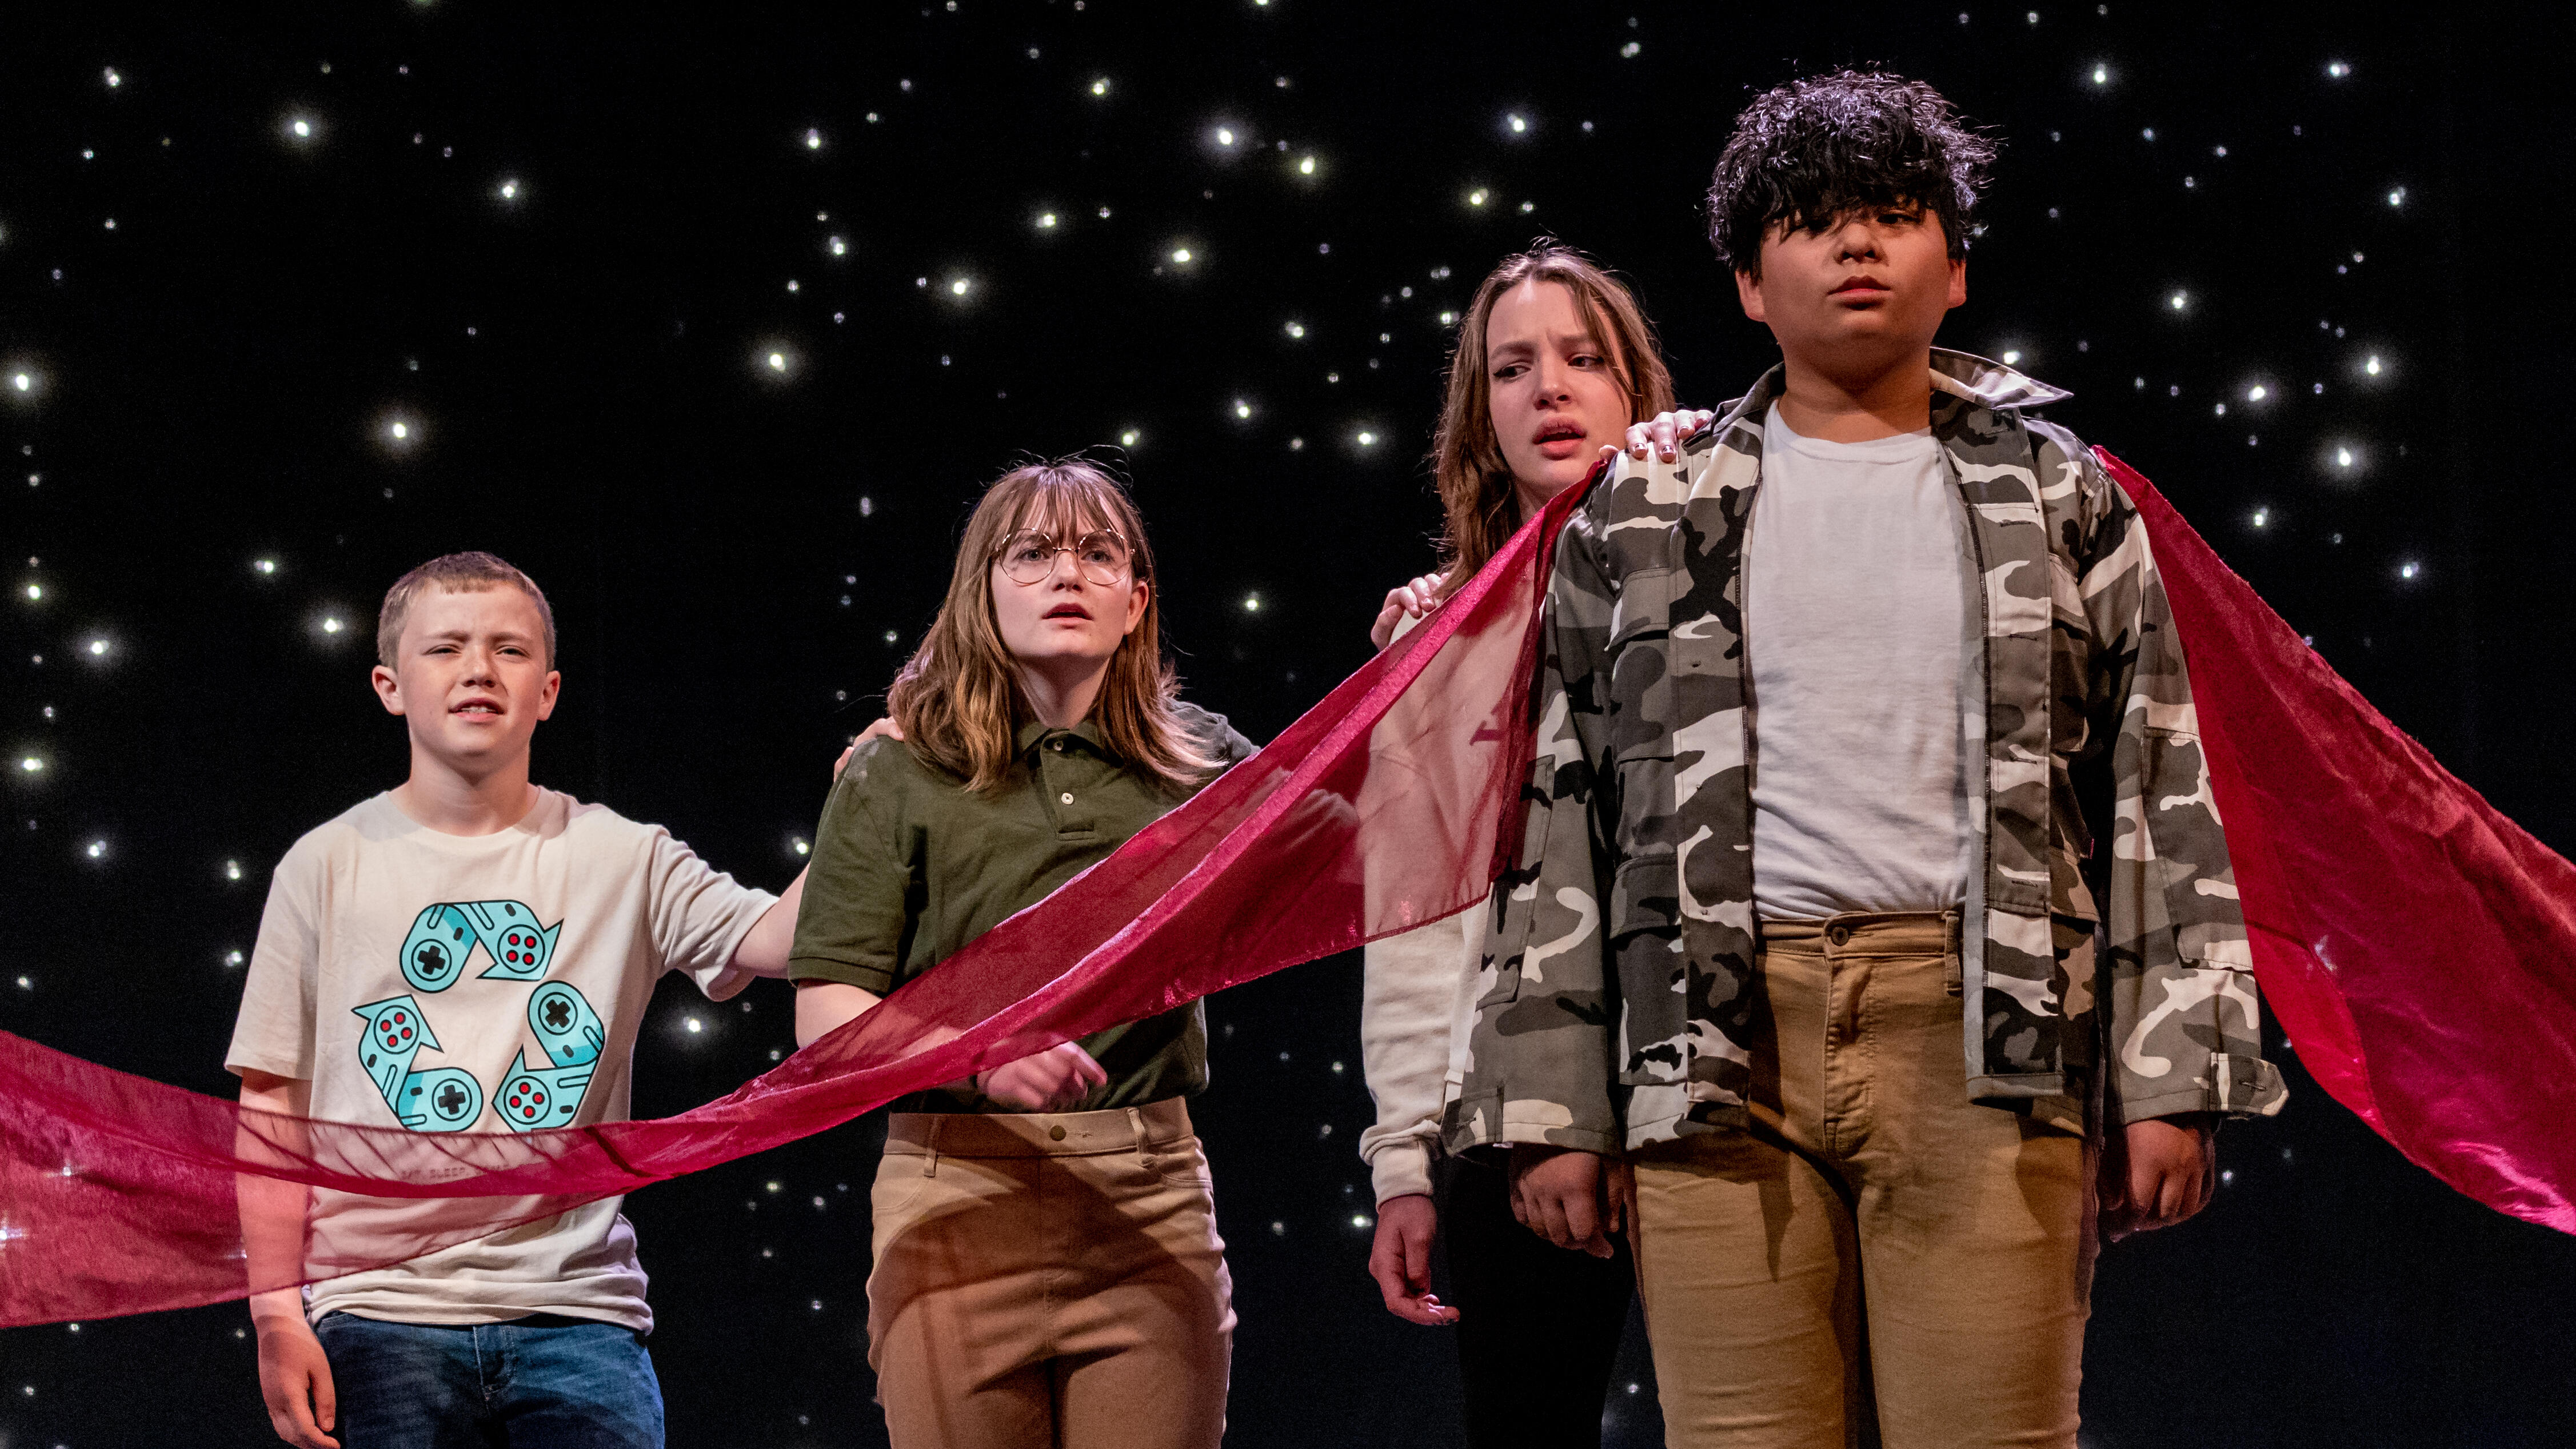  SV Middle School Drama Club takes audience through "A Wrinkle in Time"